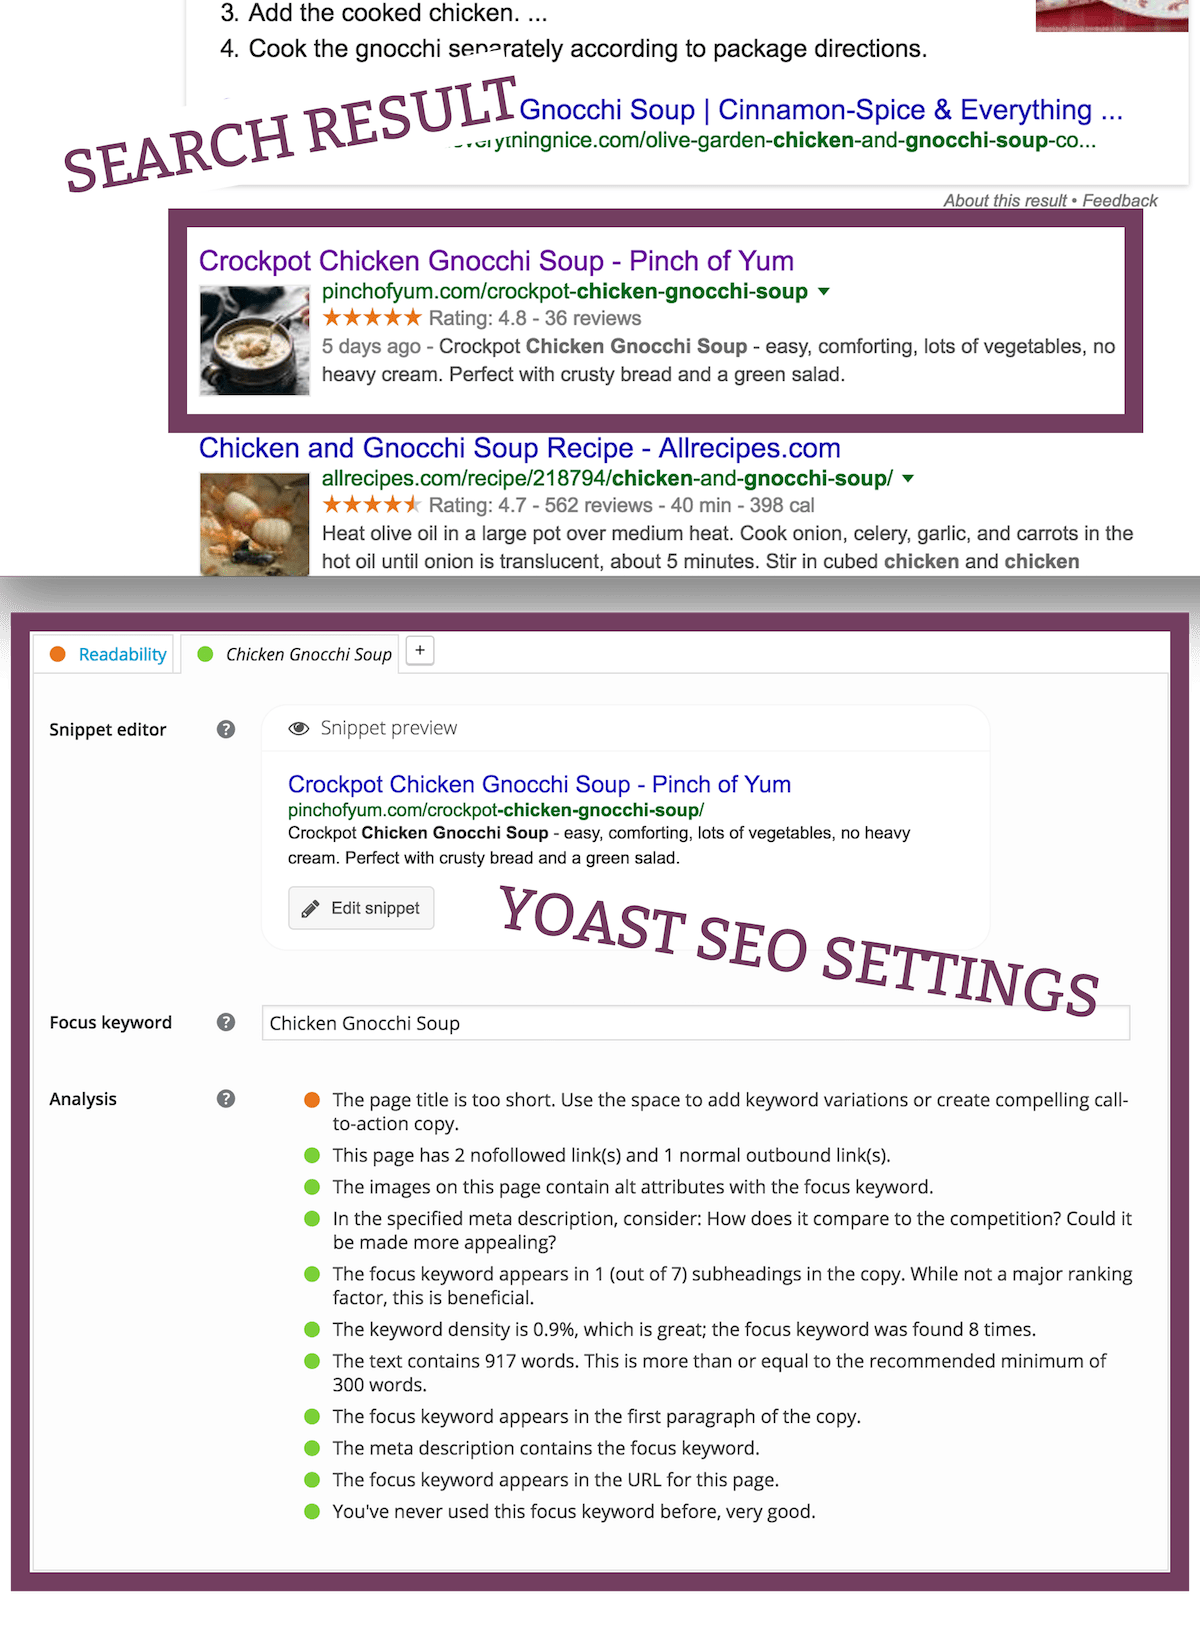 Yoast SEO Settings and Search Result.